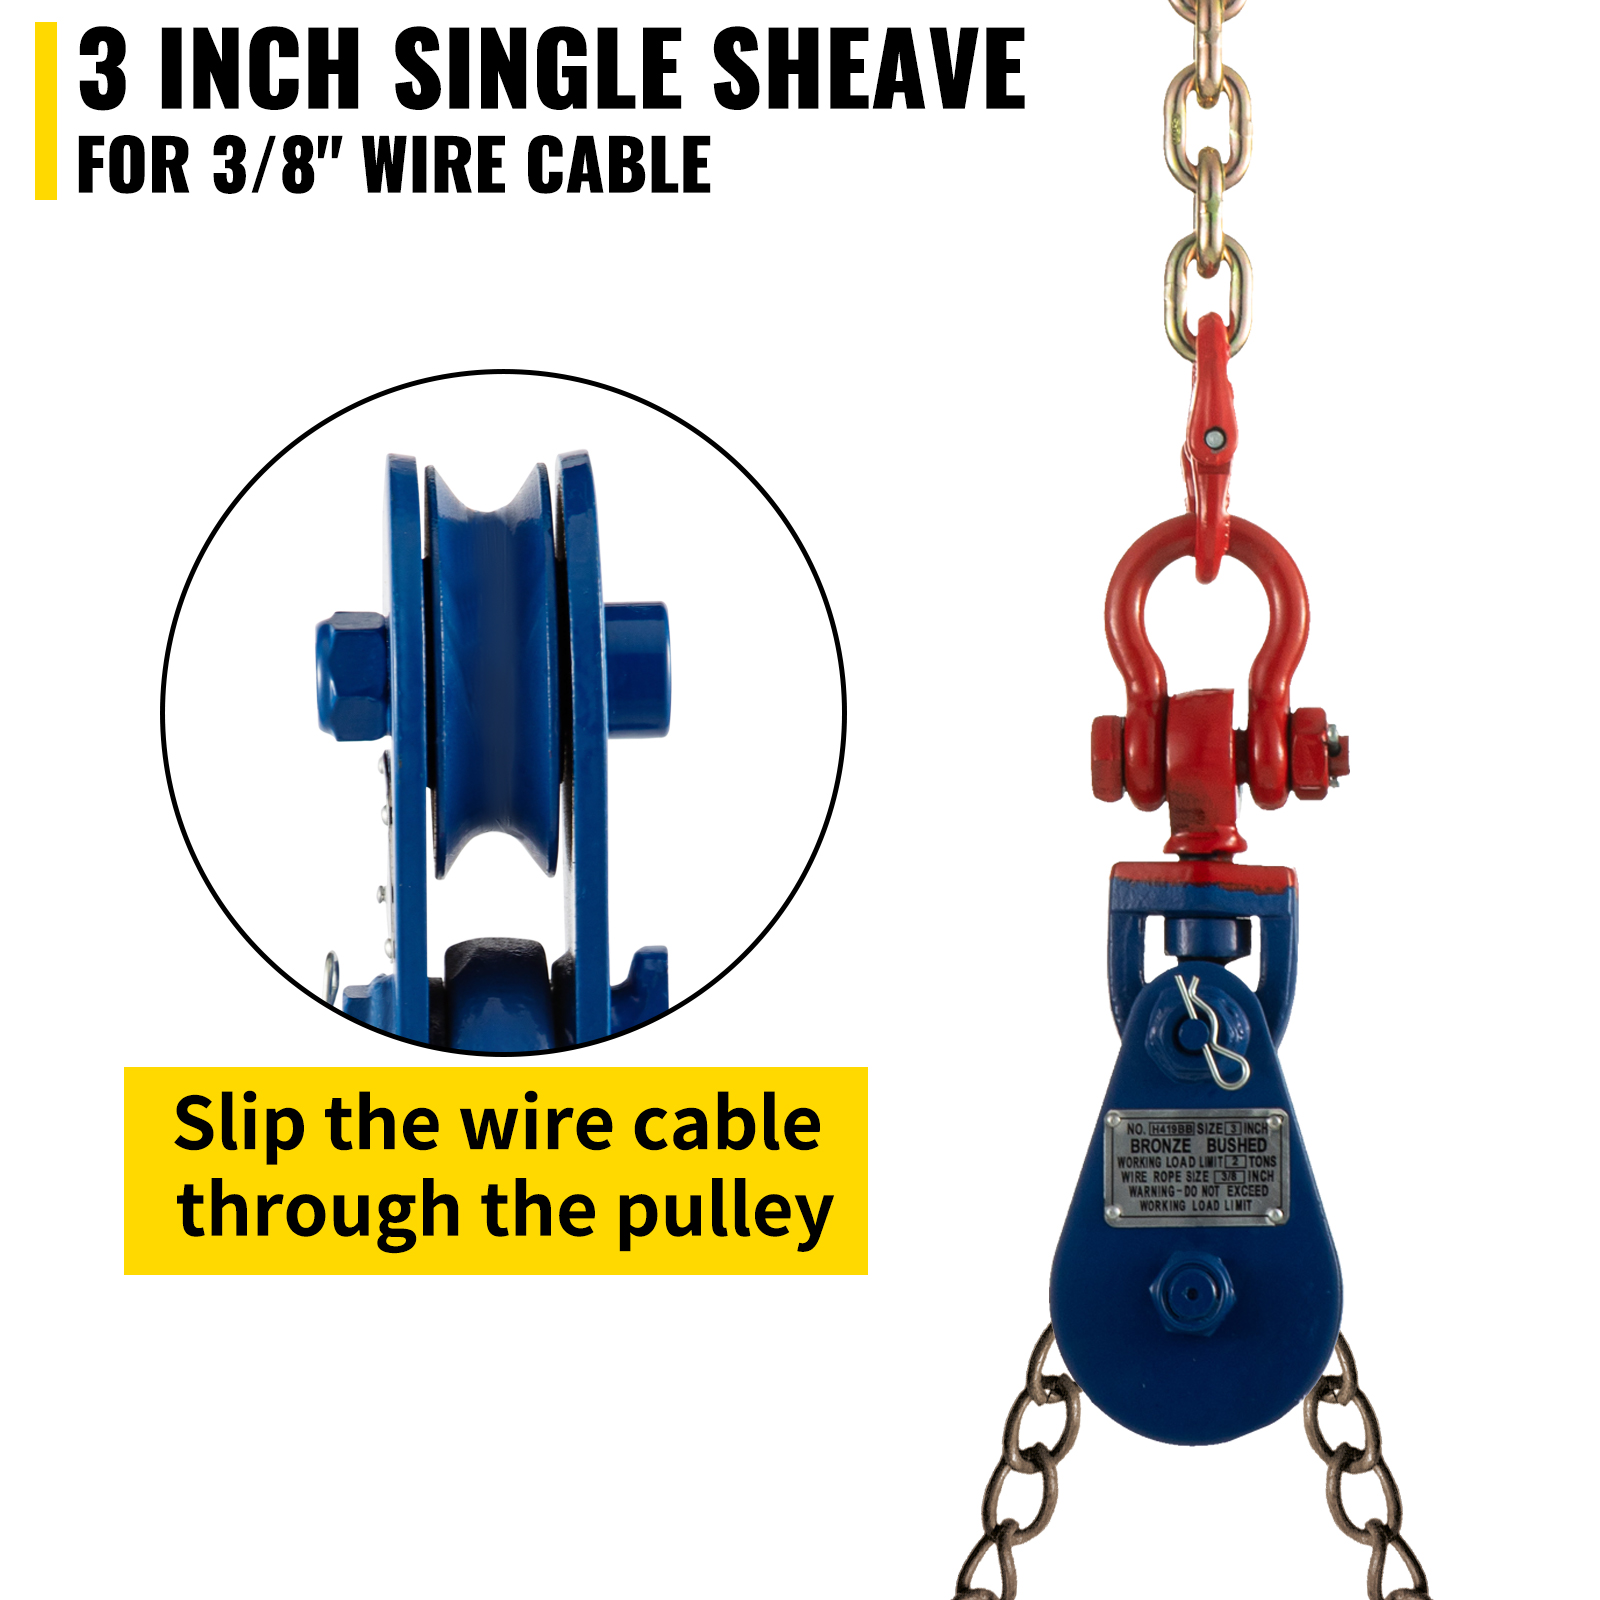 VEVOR 2ton Snatch Block with Chain, 4400 lbs Capacity Snatch